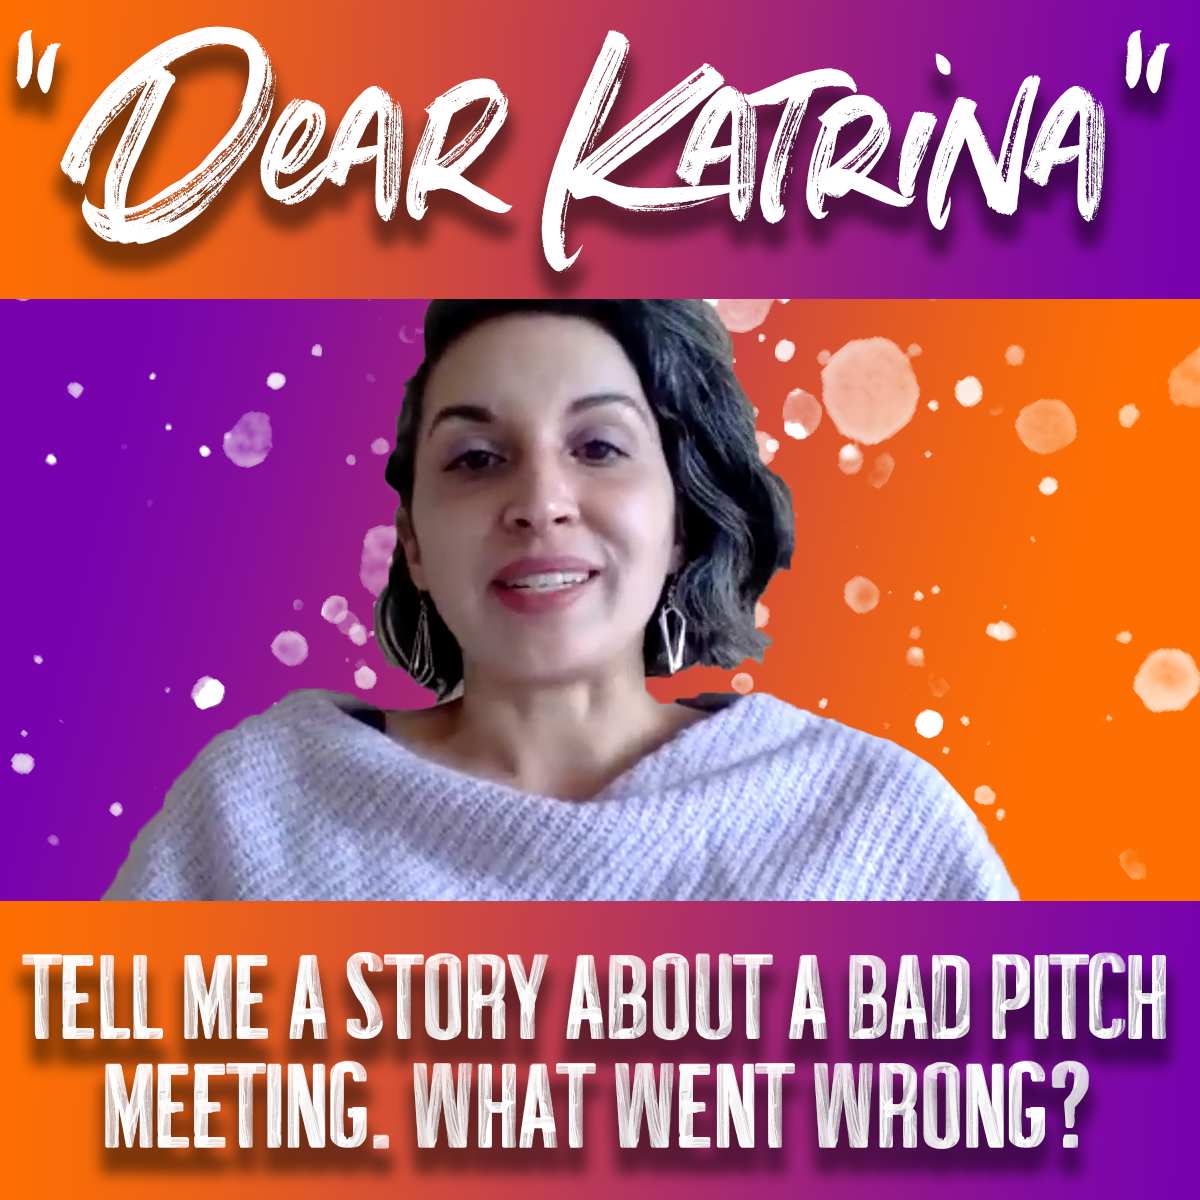 How to Recover from a Bad Pitch Meeting- Dear Katrina with Michael Preston